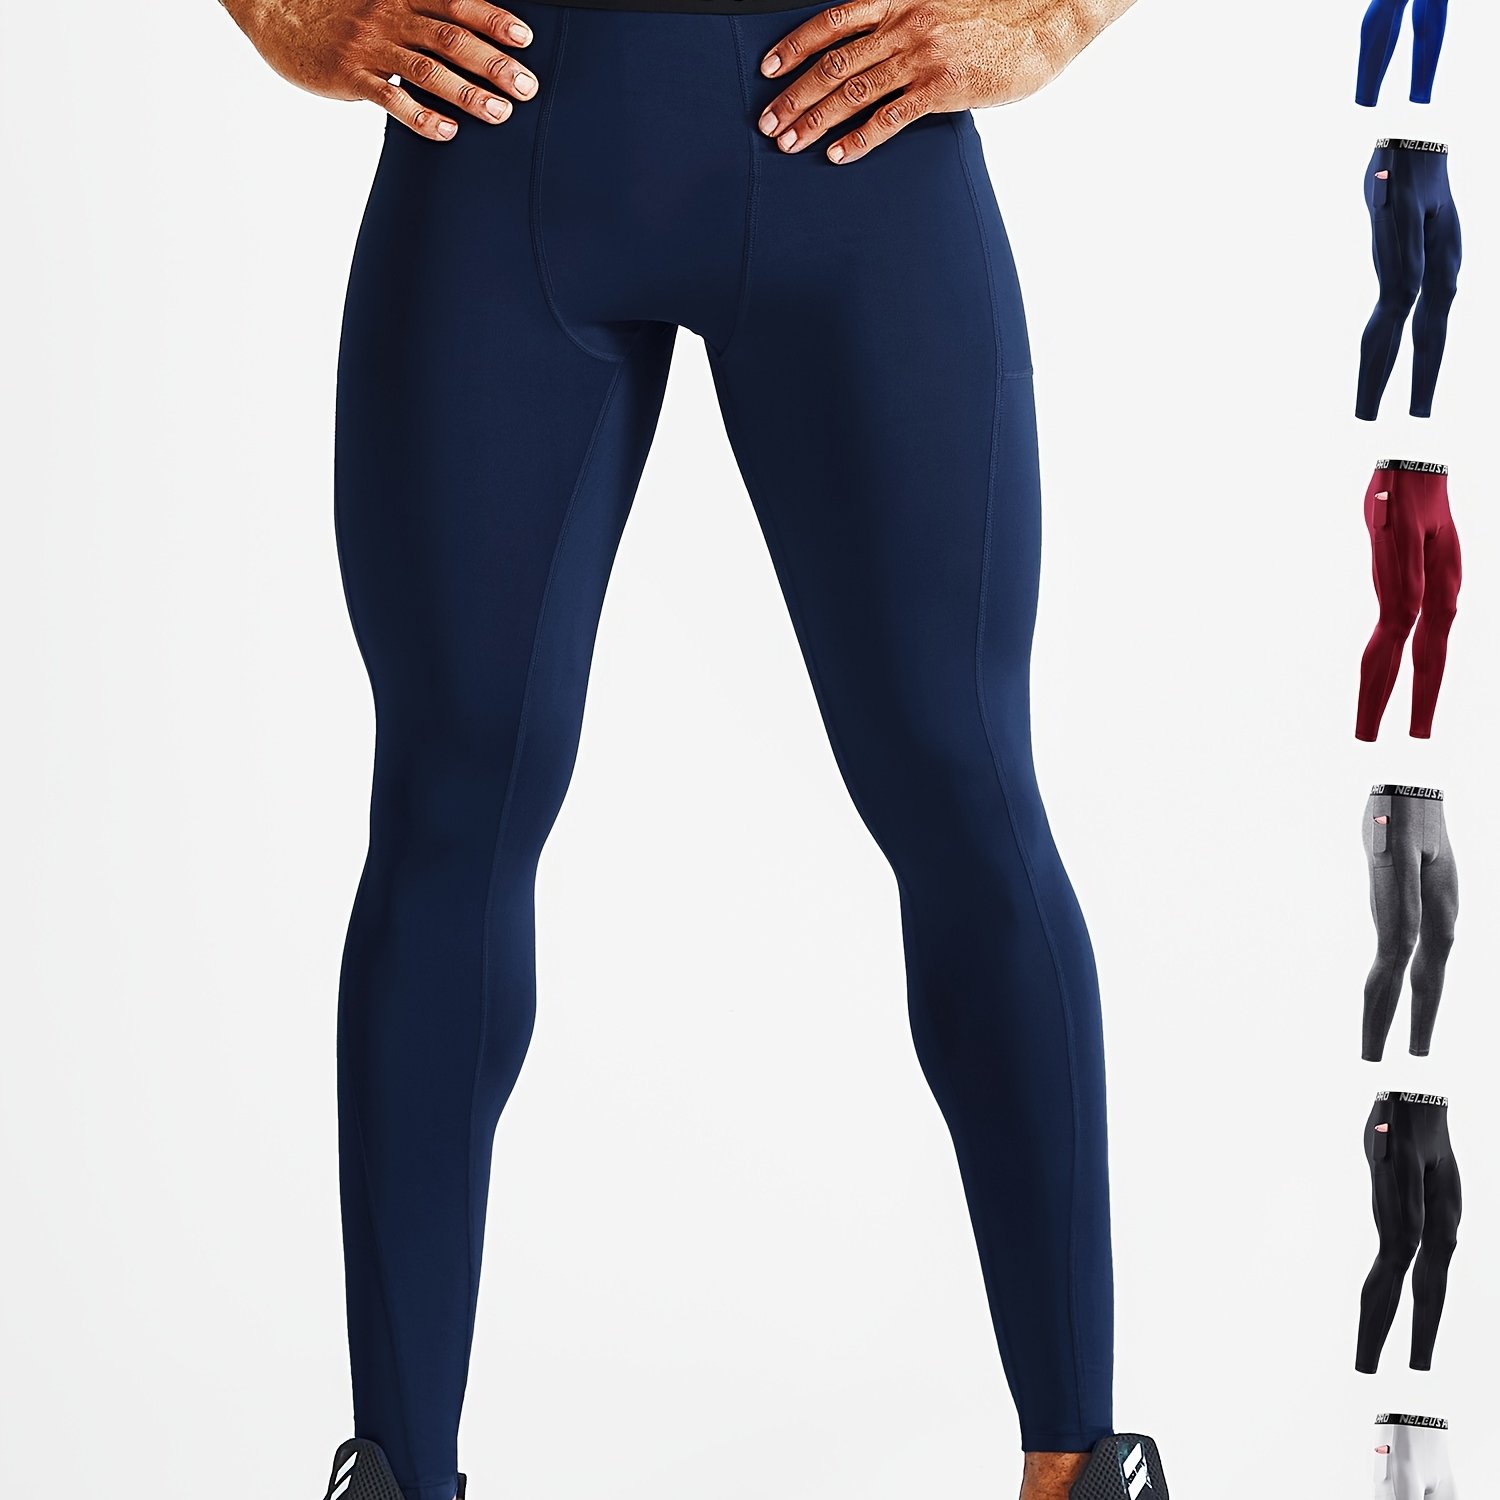 Plus Size Men's Elastic Tights With Pockets, Quick-drying And Breathable  Compression Pants Legging For Running, Basketball, Football And Fitness